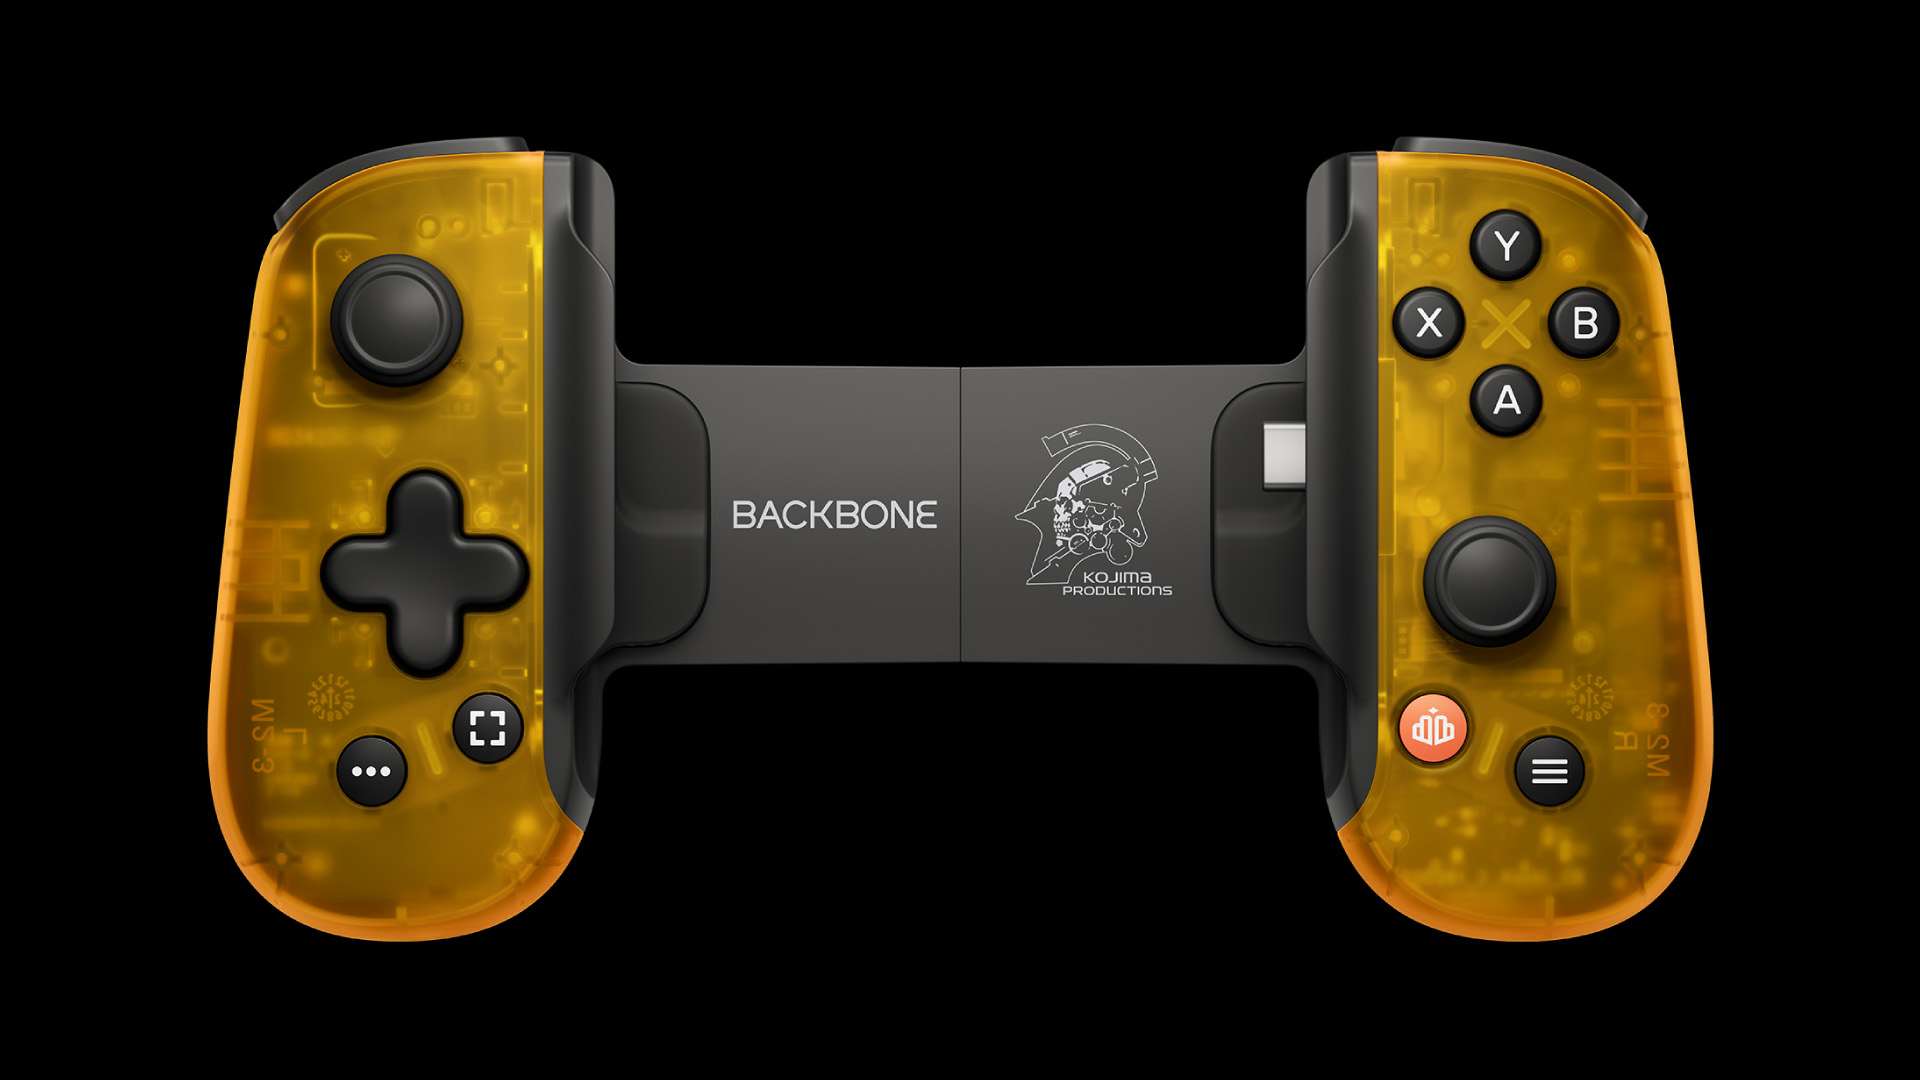 Backbone One Death Stranding Limited Edition Controller Release Date  Announced, Includes Free Game Code – TouchArcade